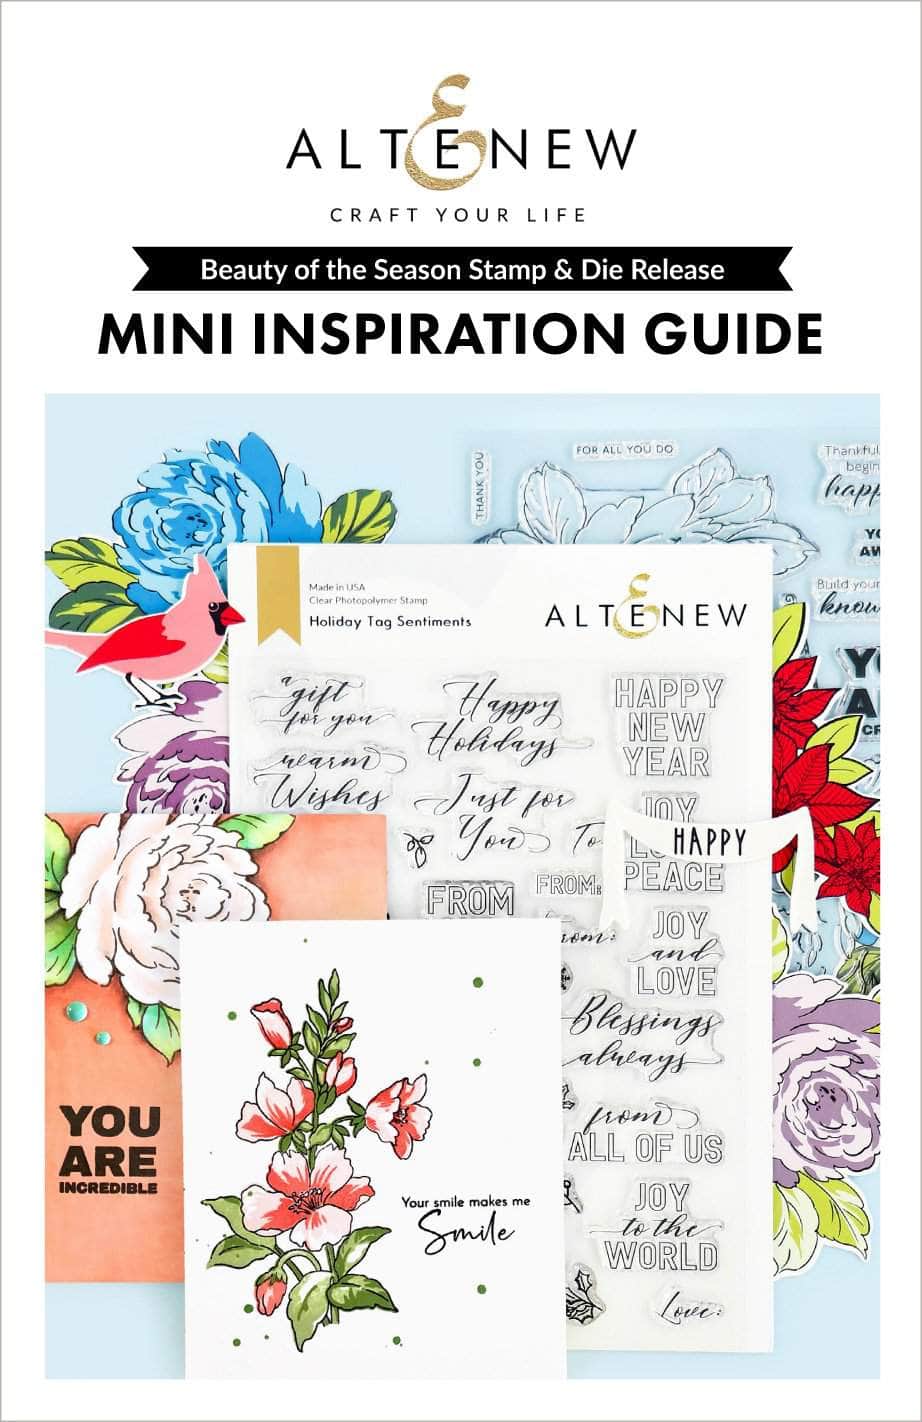 Printed Media Beauty of the Season Stamp & Die Release Mini Inspiration Guide